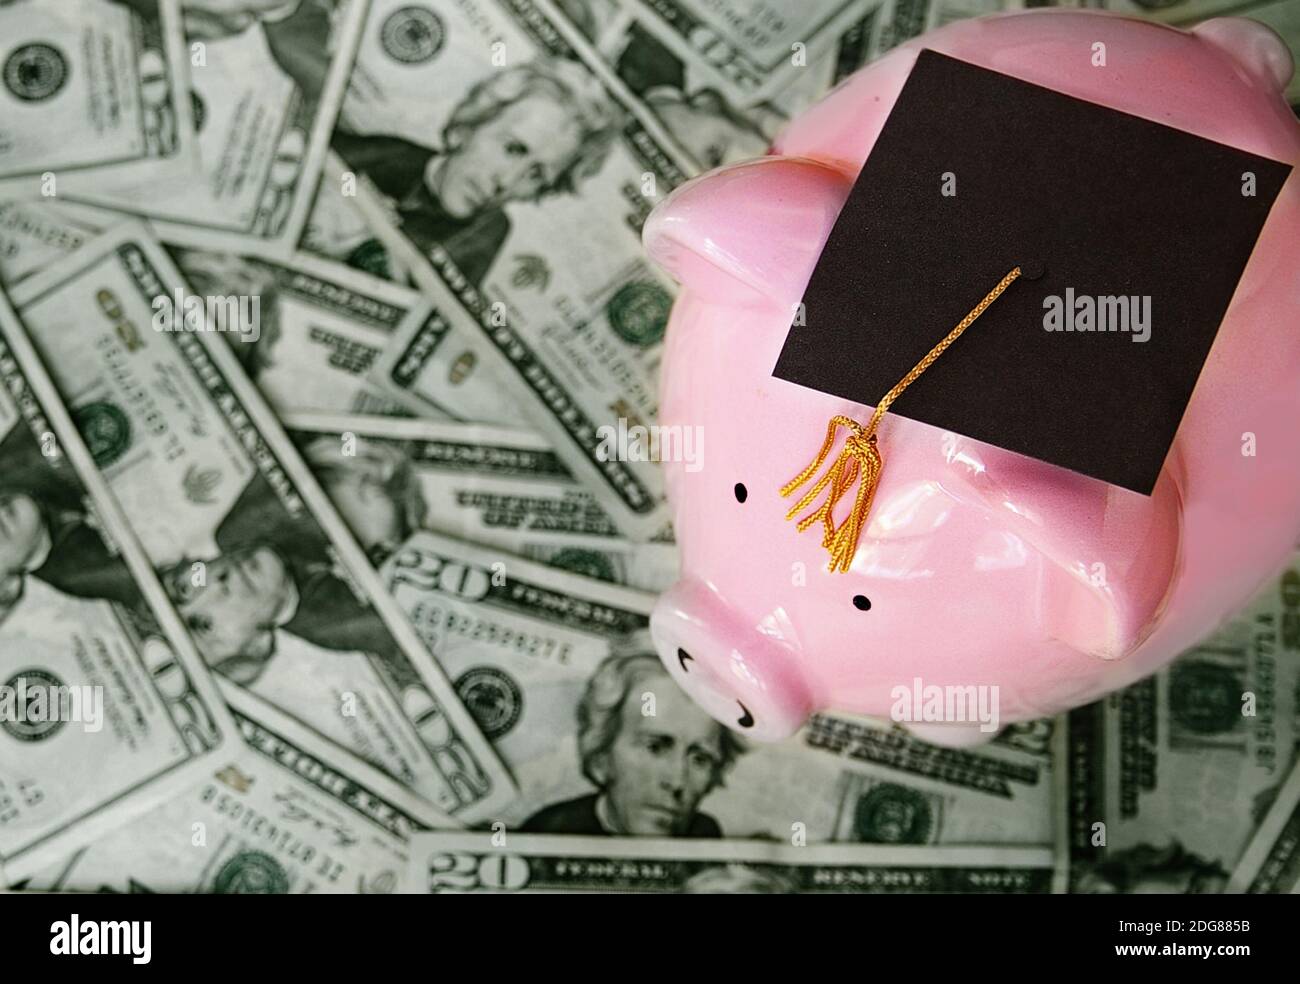 Education cost concept Stock Photo